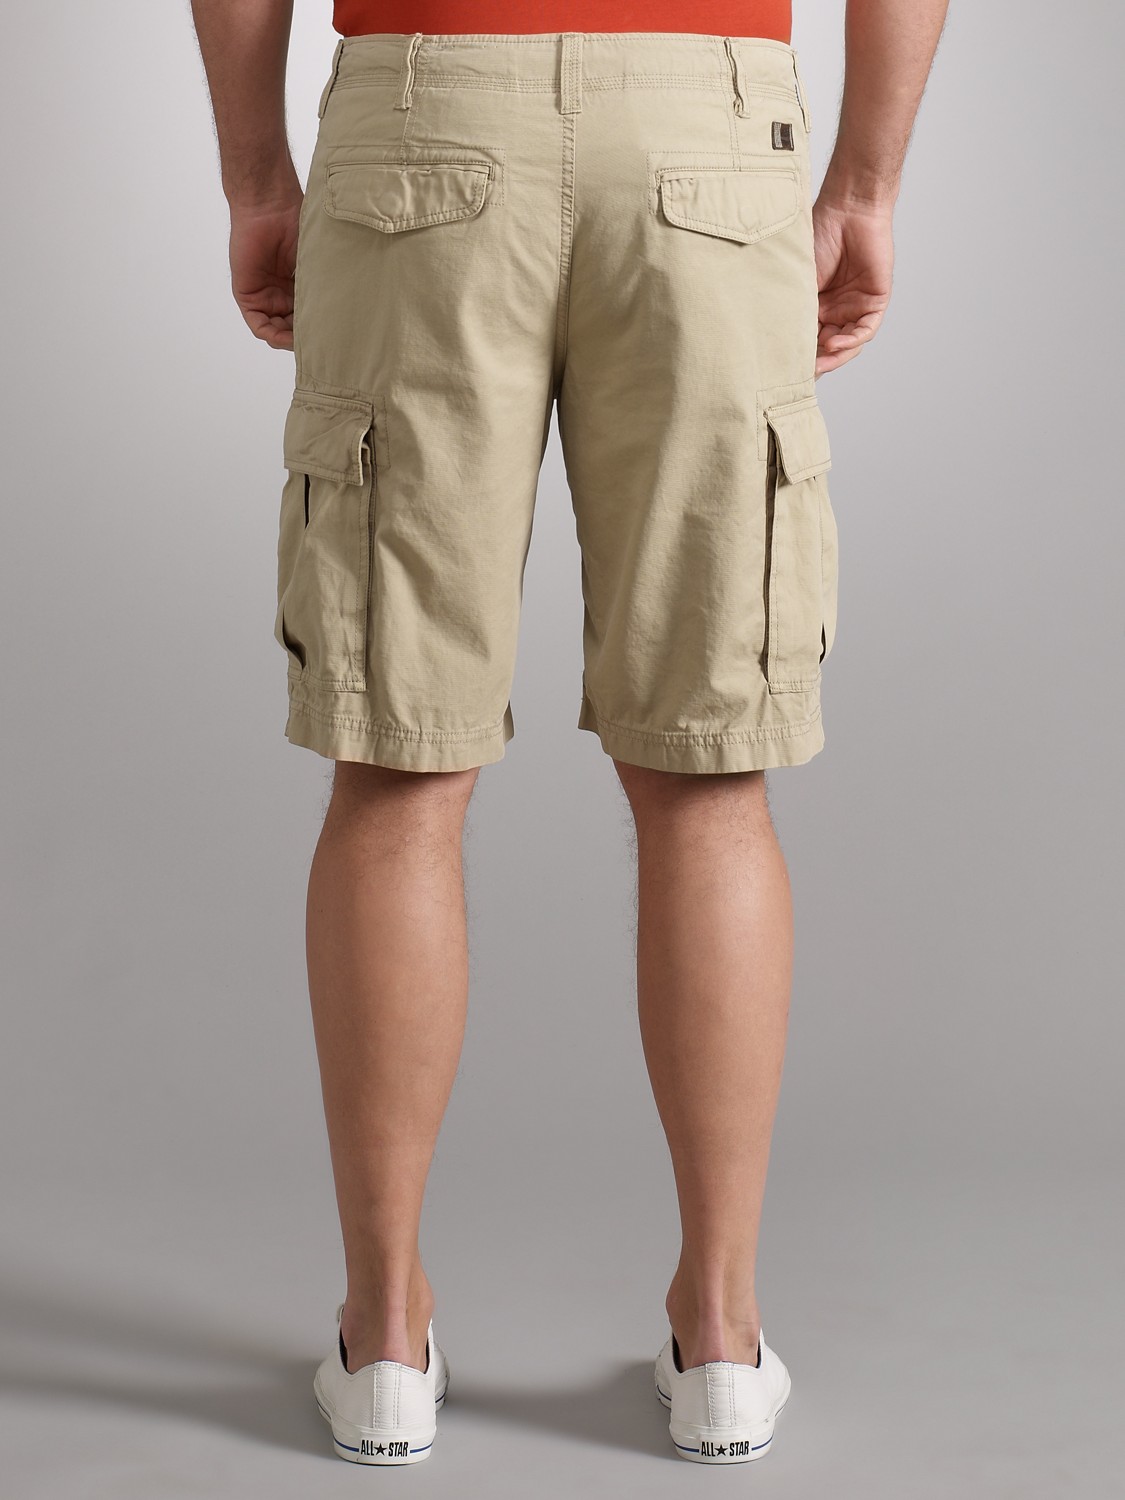 Timberland Eathkeepers Bridgeport Gd Cargo Shorts in Natural for Men - Lyst